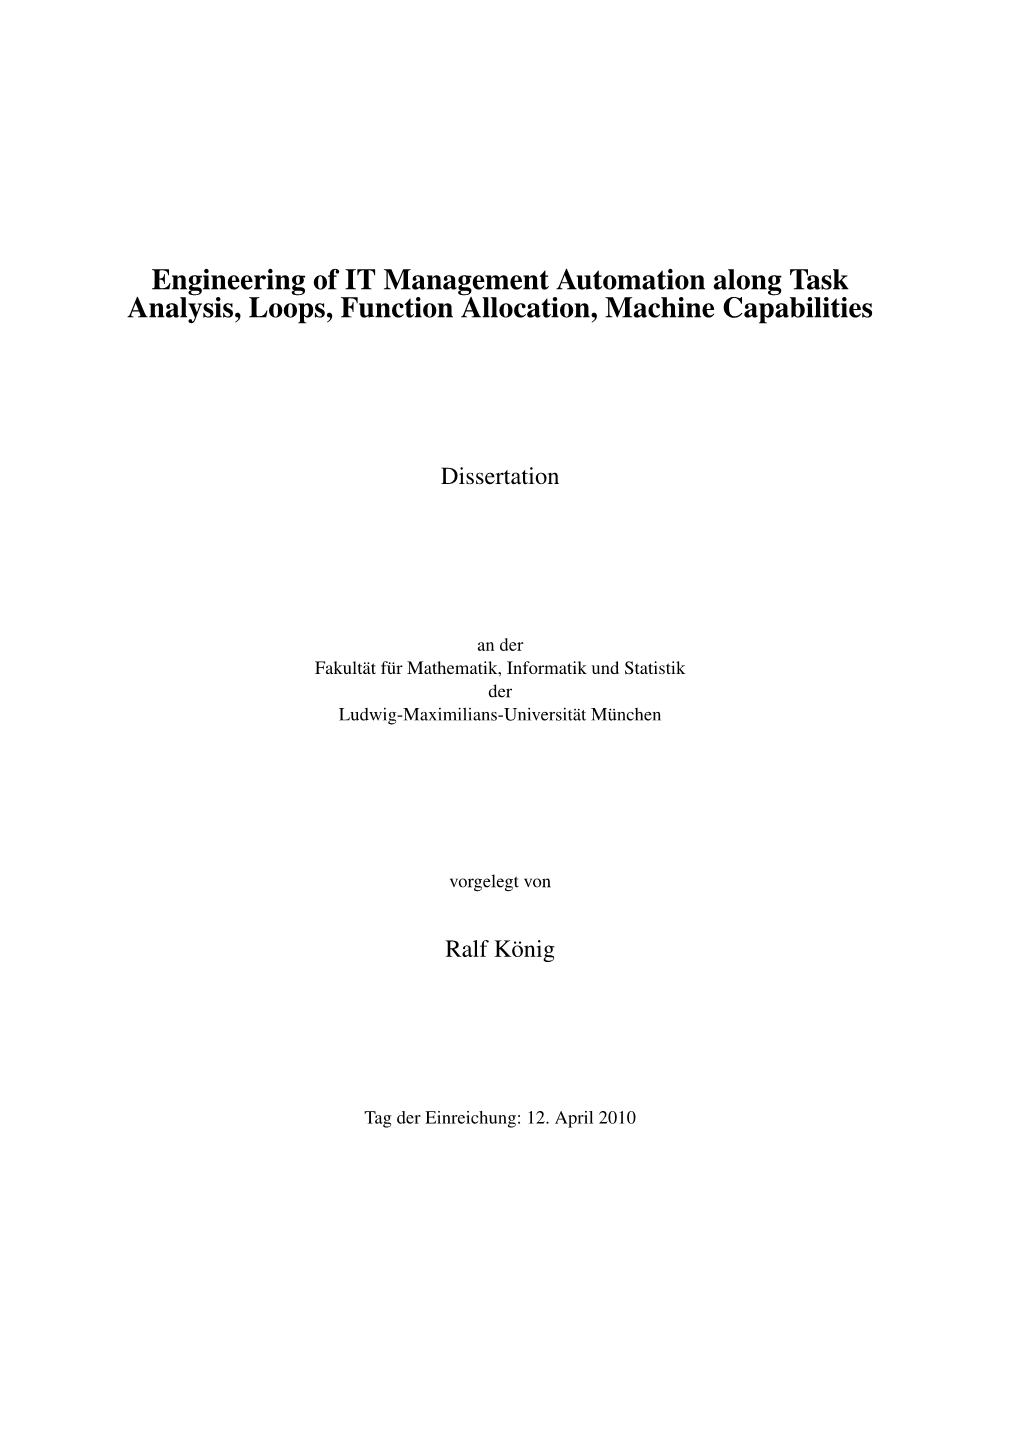 Engineering of IT Management Automation Along Task Analysis, Loops, Function Allocation, Machine Capabilities